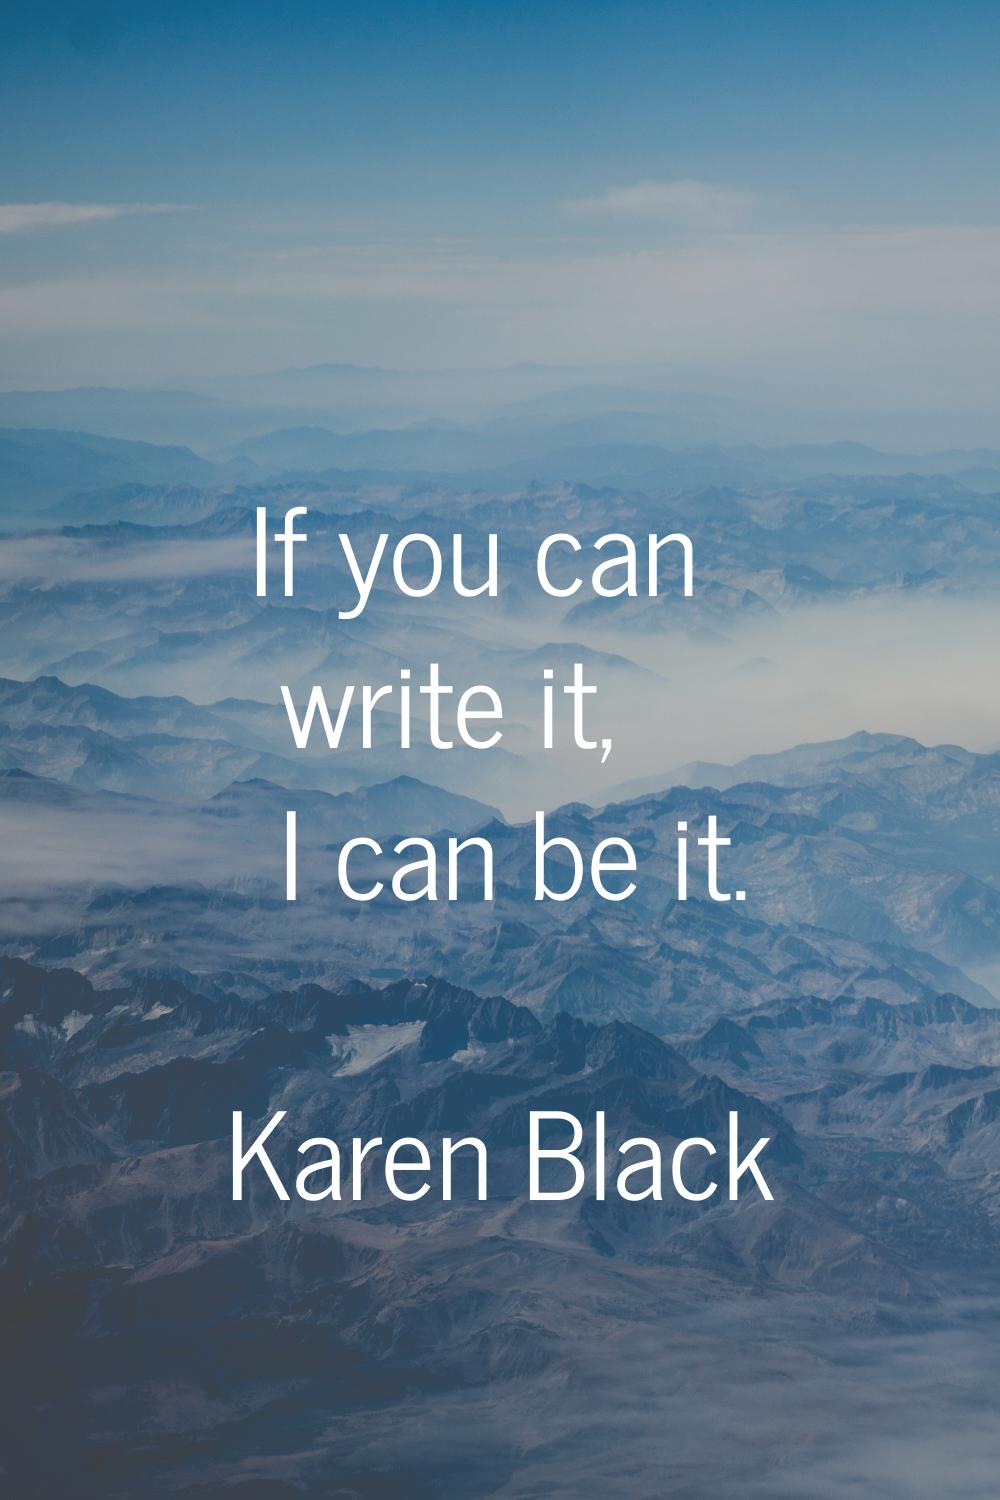 If you can write it, I can be it.